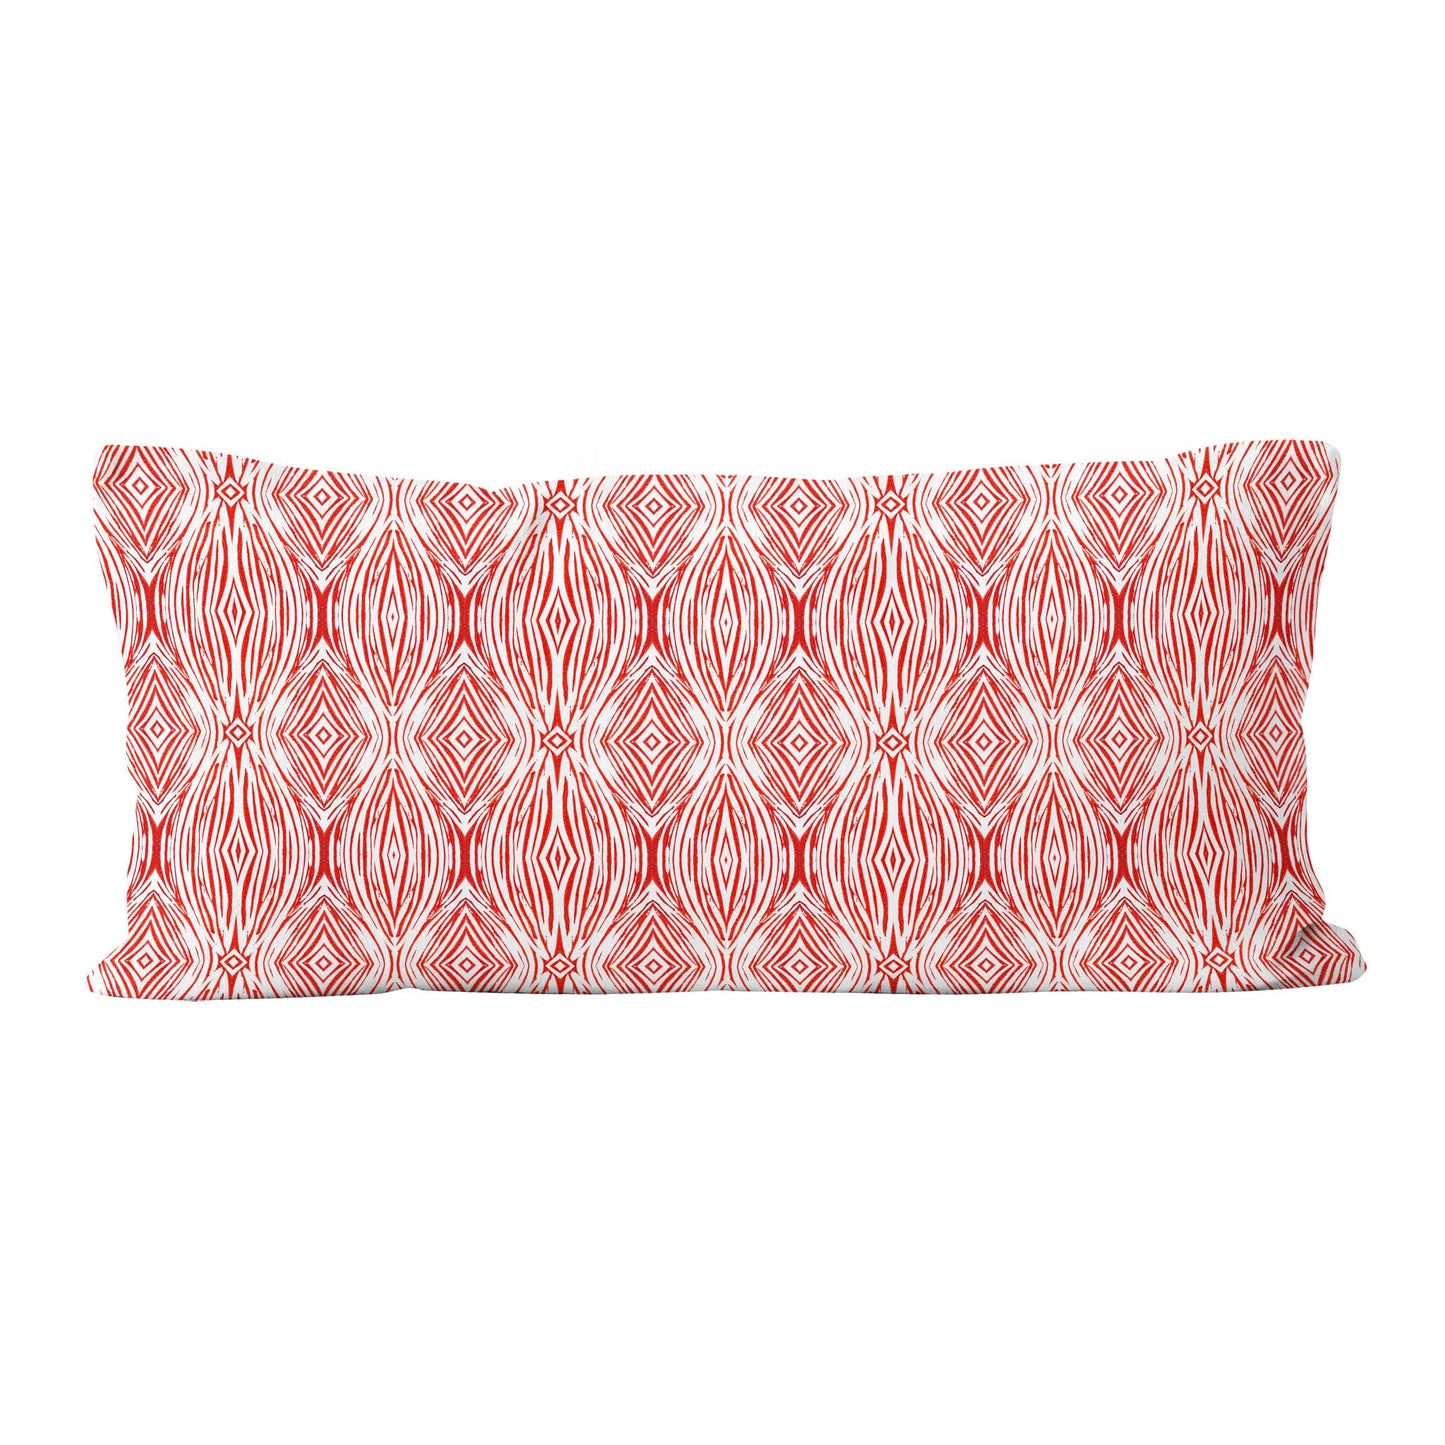 12 x 24 lumbar pillow featuring a red and white abstract linocut pattern.